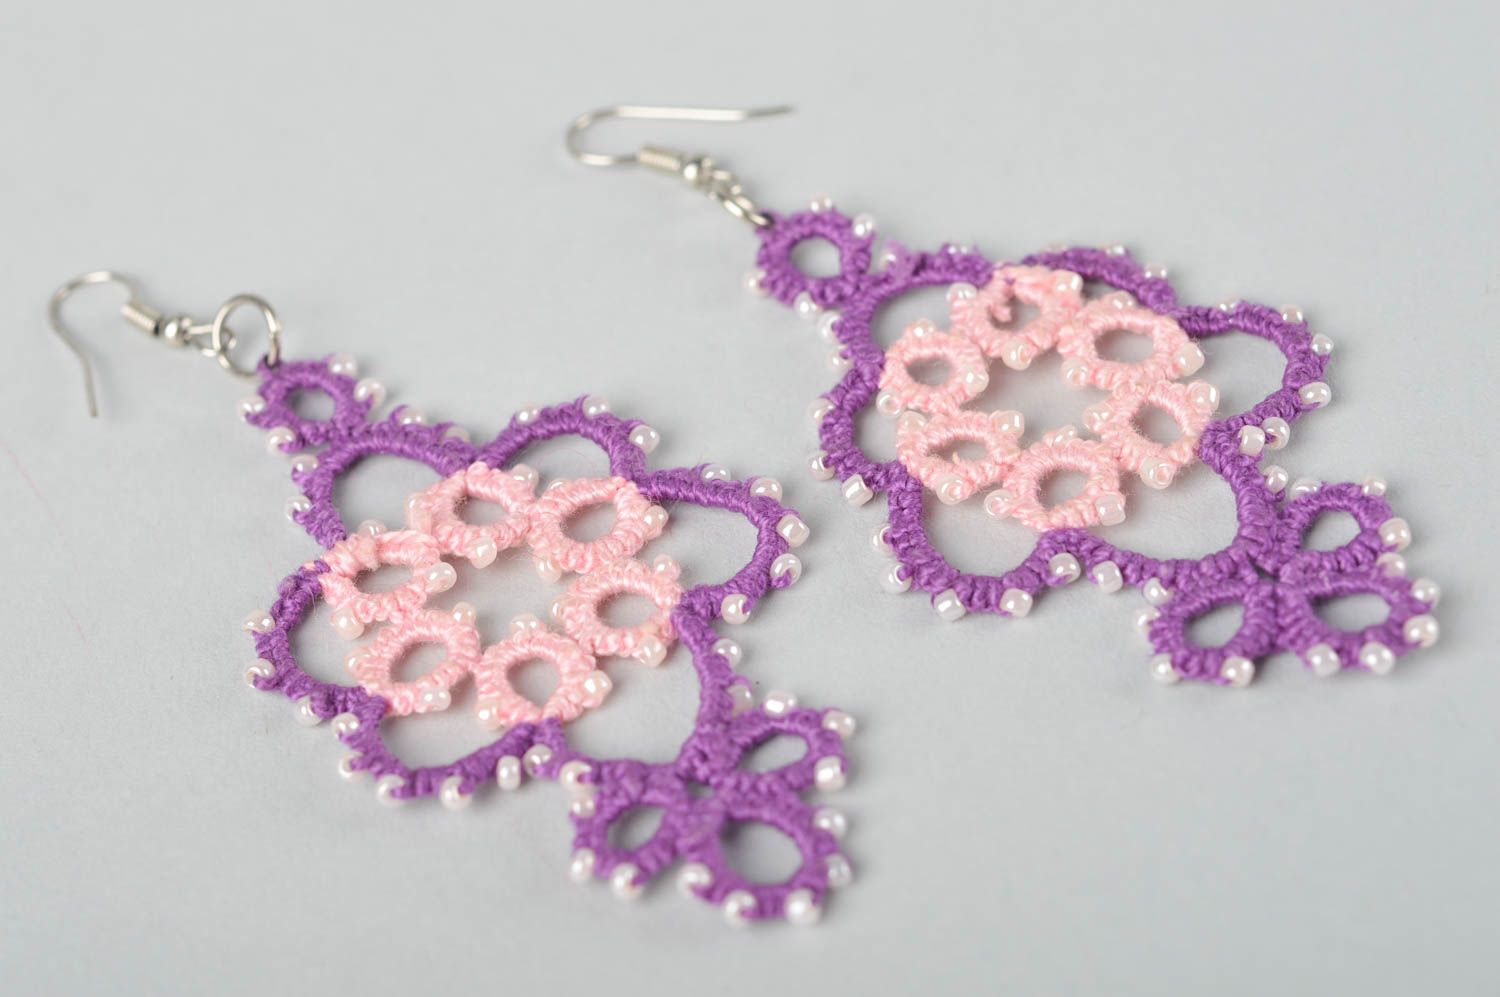 Homemade jewelry lacy earrings designer accessories earrings for women photo 2